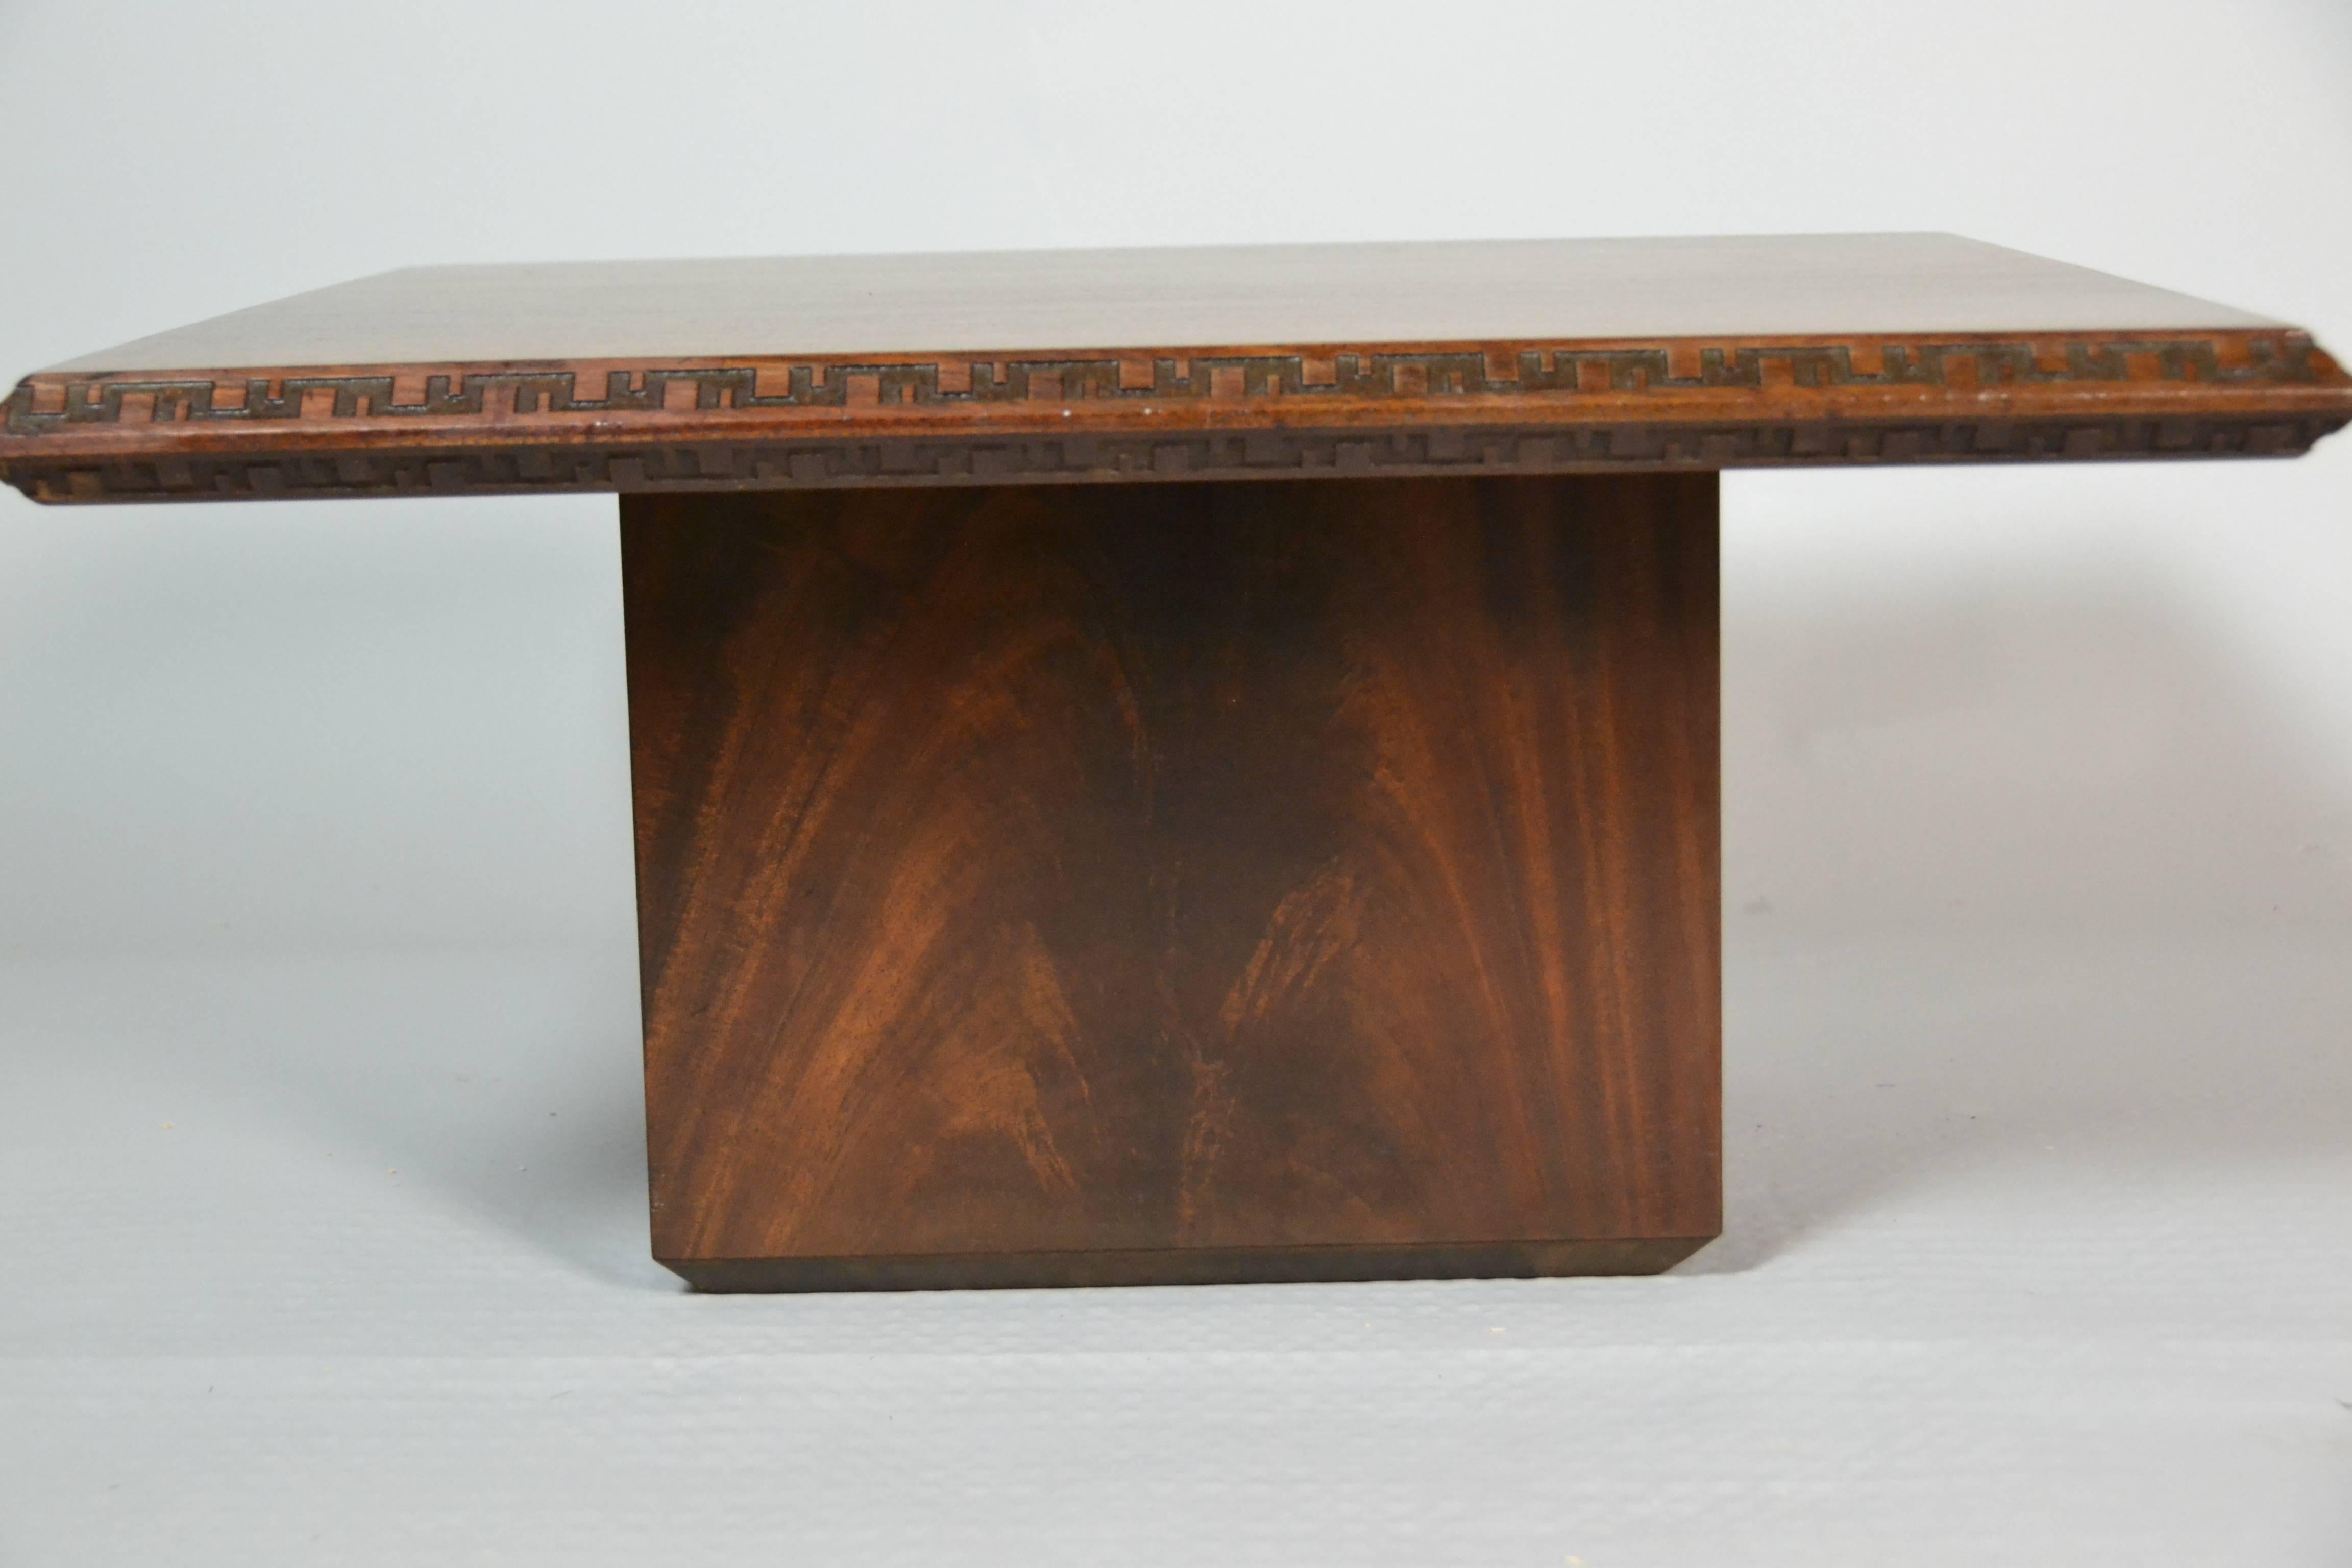 A Frank Lloyd Wright mahogany coffee table or end table designed by  for Heritage Henredon for their Taliesin line introduced in 1955.
The table is in excellent condition.
 